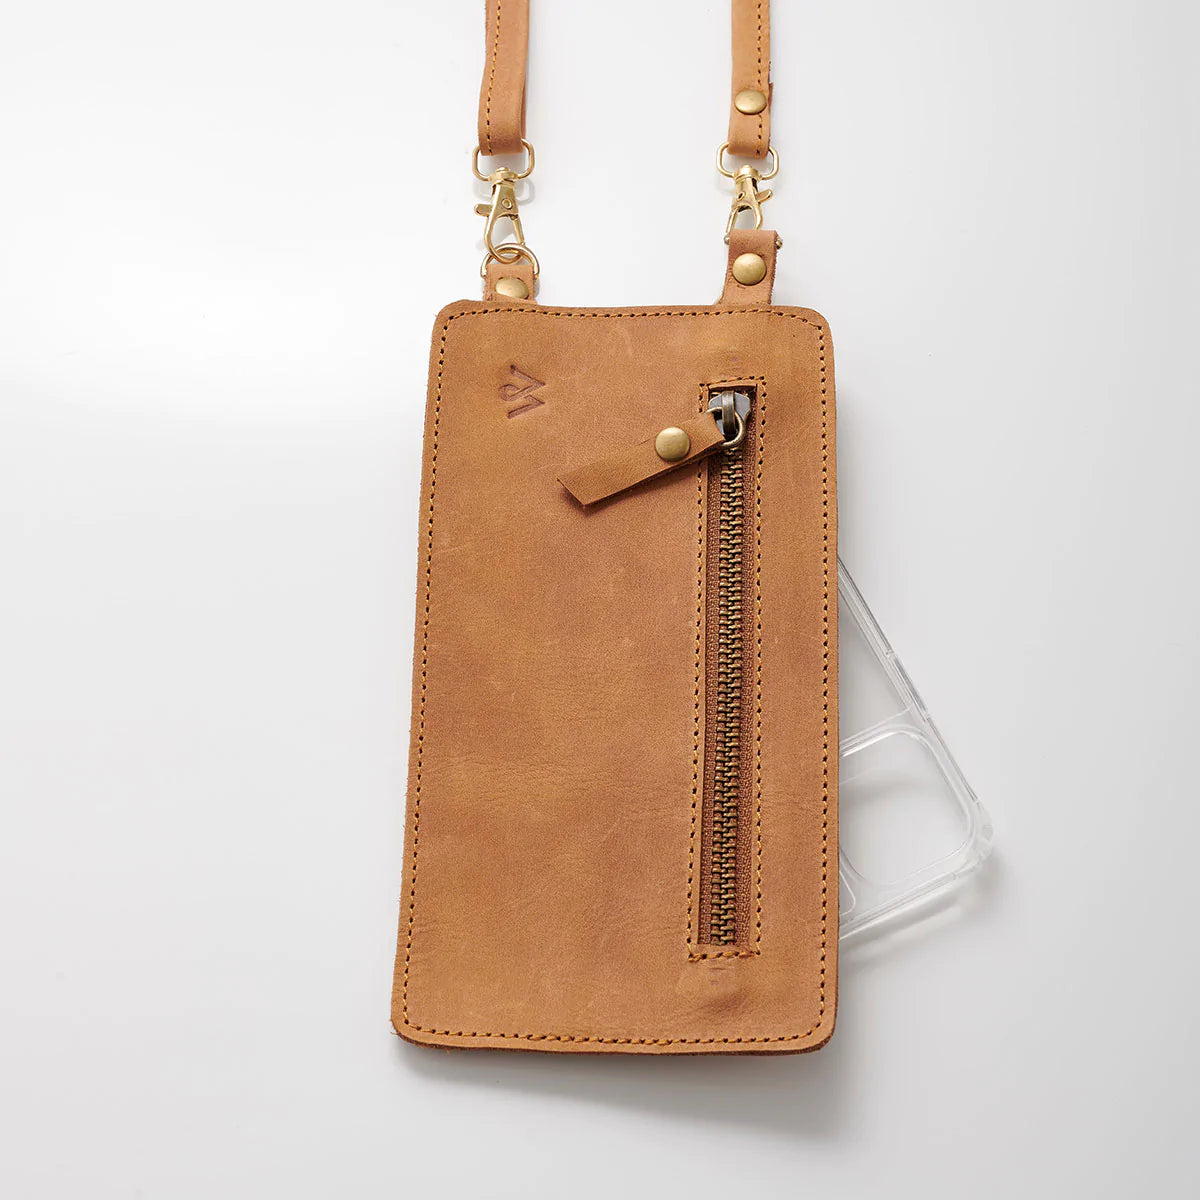 LEATHER POUCH & STRAP TAN